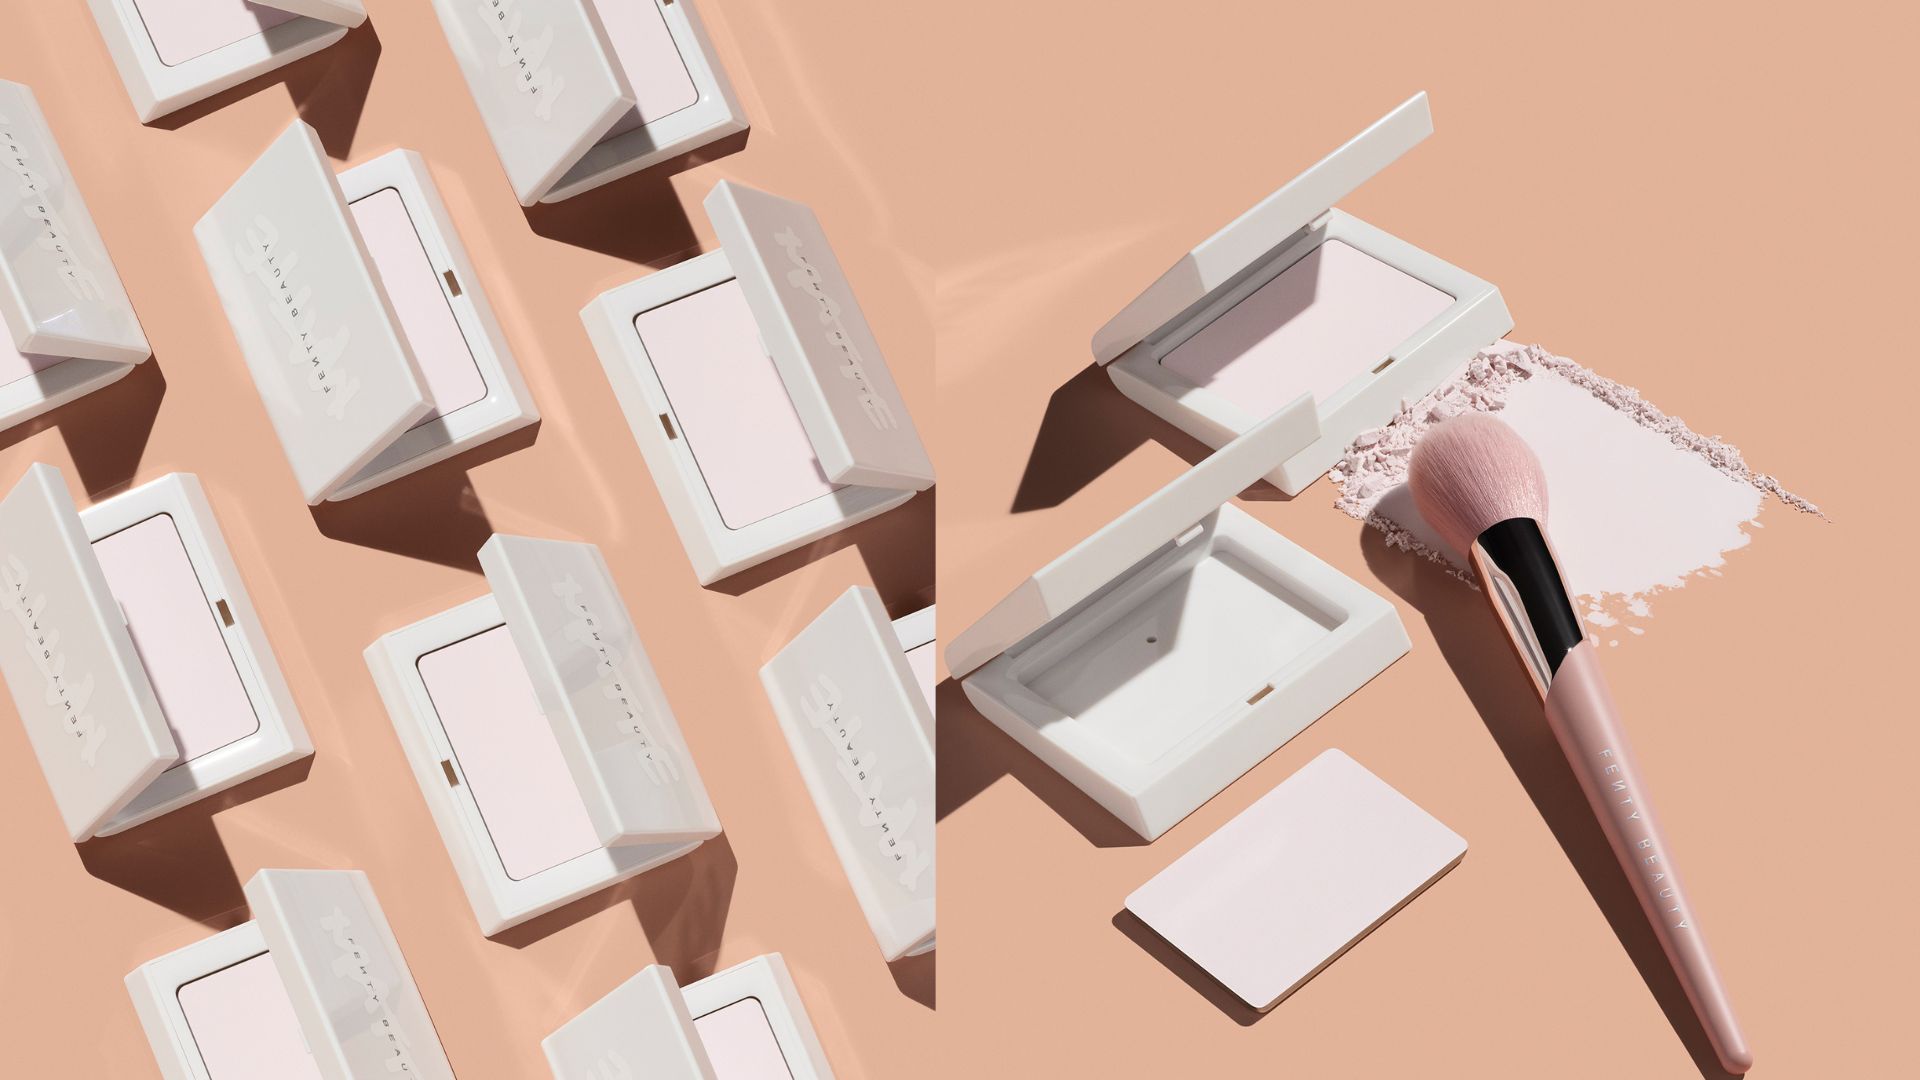 Fenty Beauty Relaunches Blotting Powder In Refillable Packaging